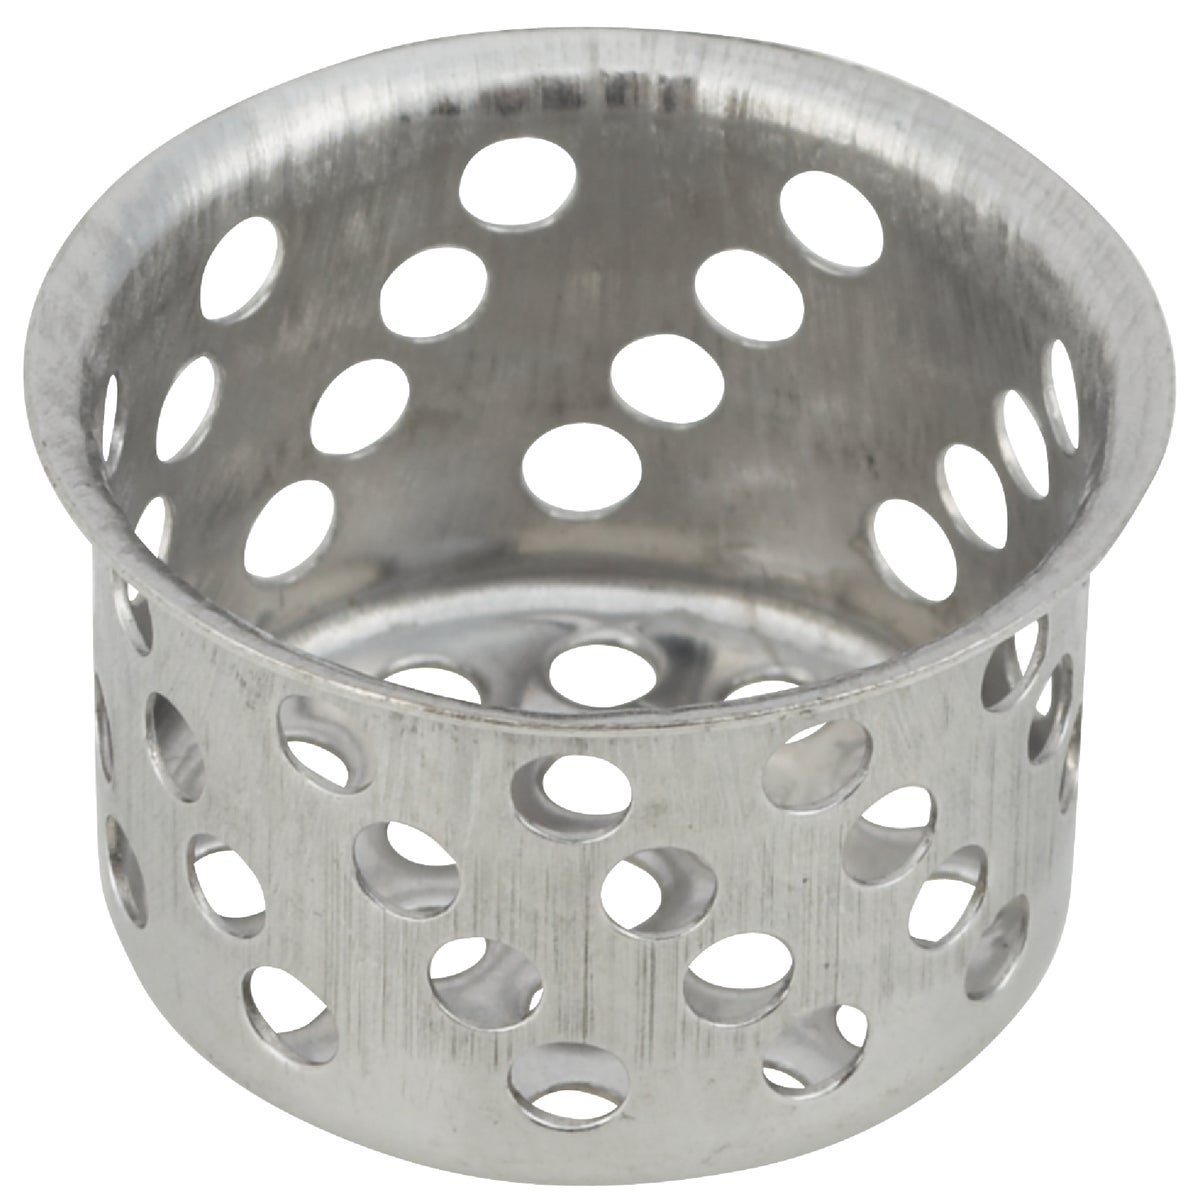 Item 415633, Fits most basin drains. Chrome-plated. For 1" drain opening.